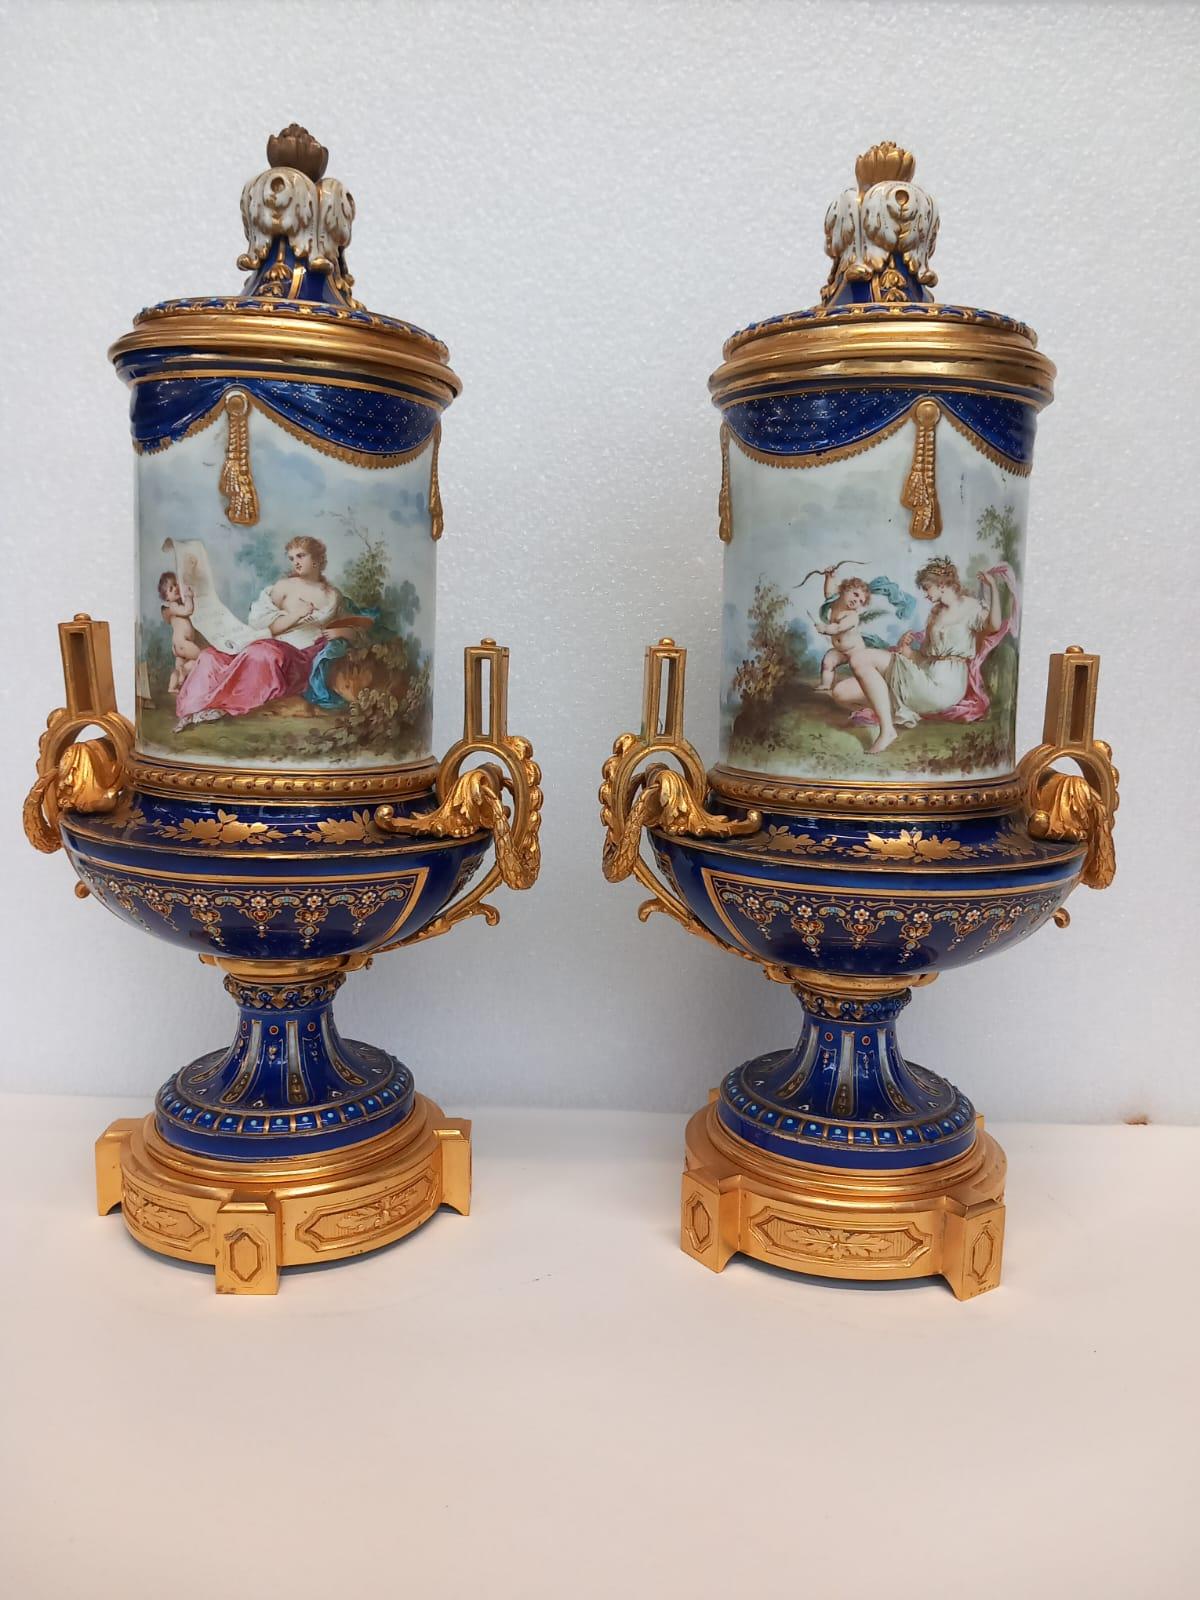 A  pair of antique French Sèvres vases dating from the Napoleon III era. 
Decorated in the eighteenth century style with its blue enamel body and highlighted in gold leaf with hand enamelled designs made to resemble jewels. 
Both vases are hand